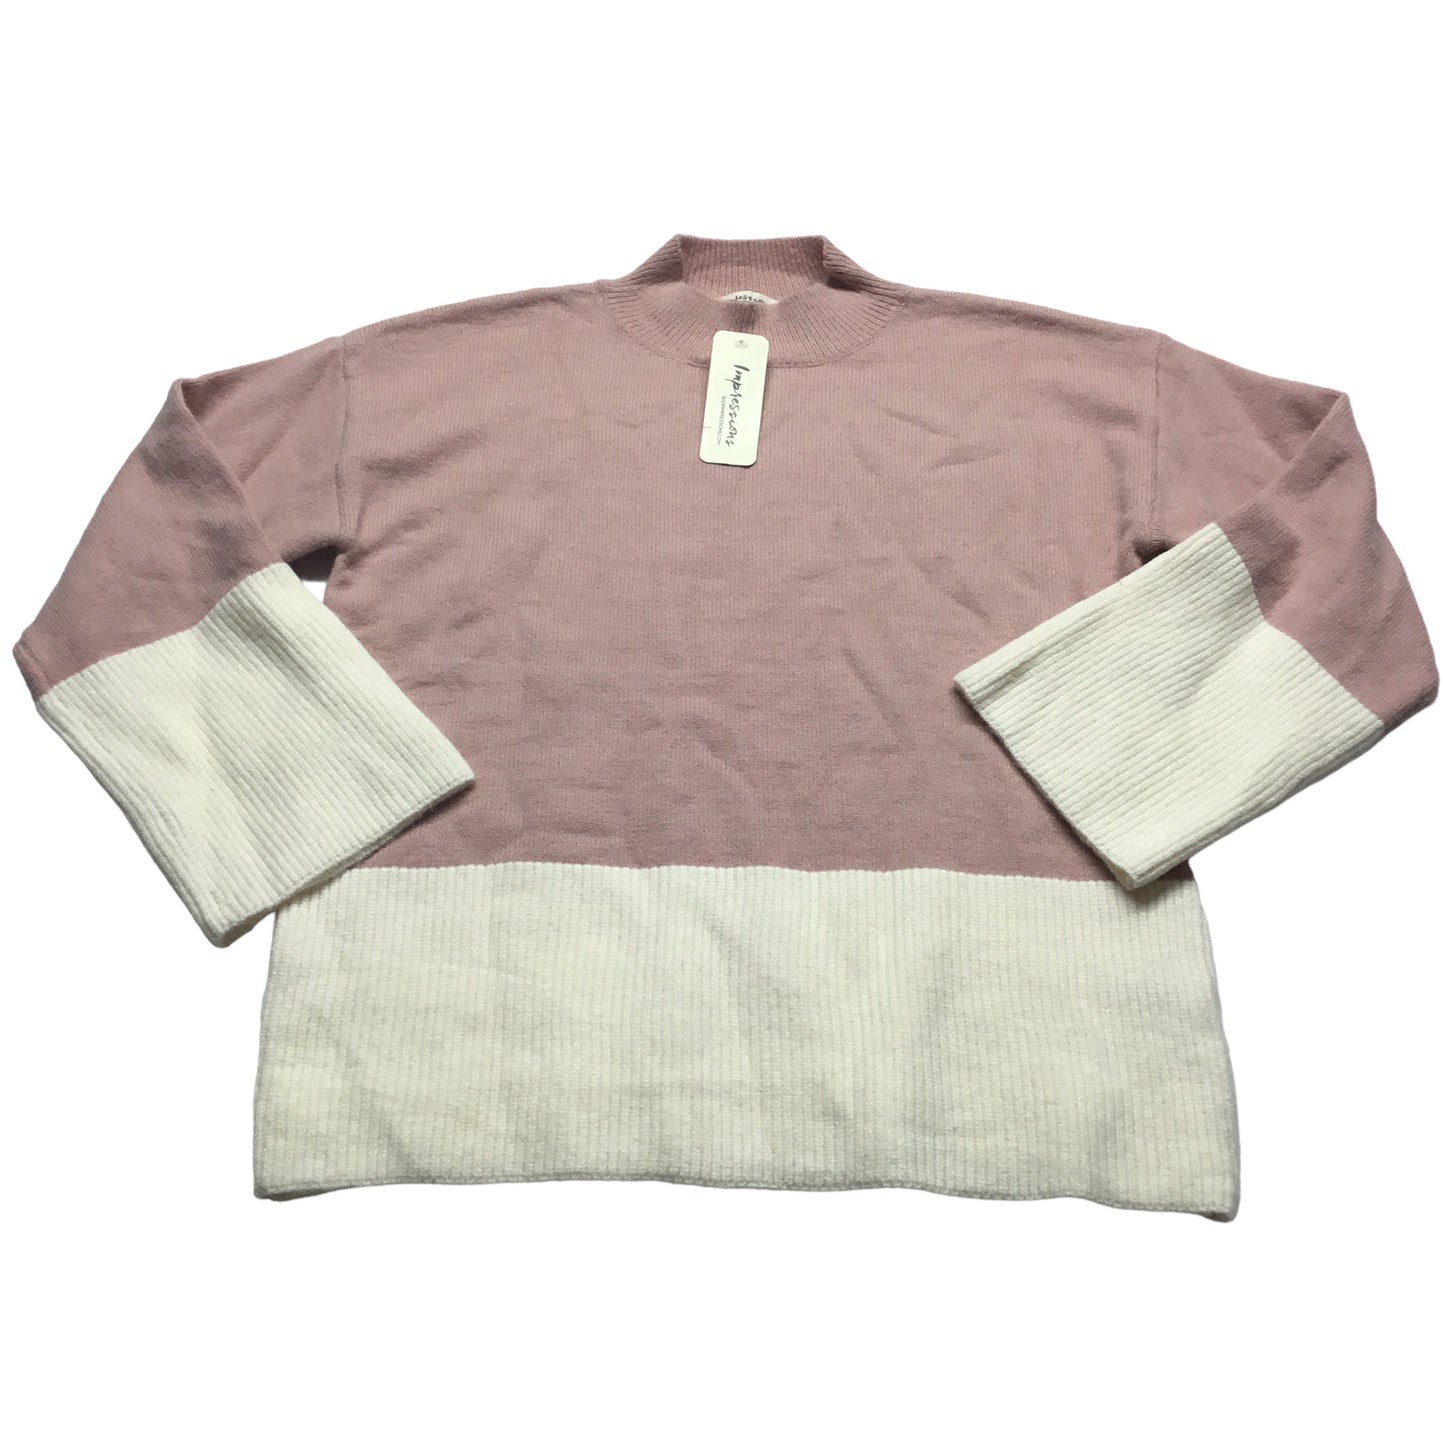 Sweater By Impressions  Size: S